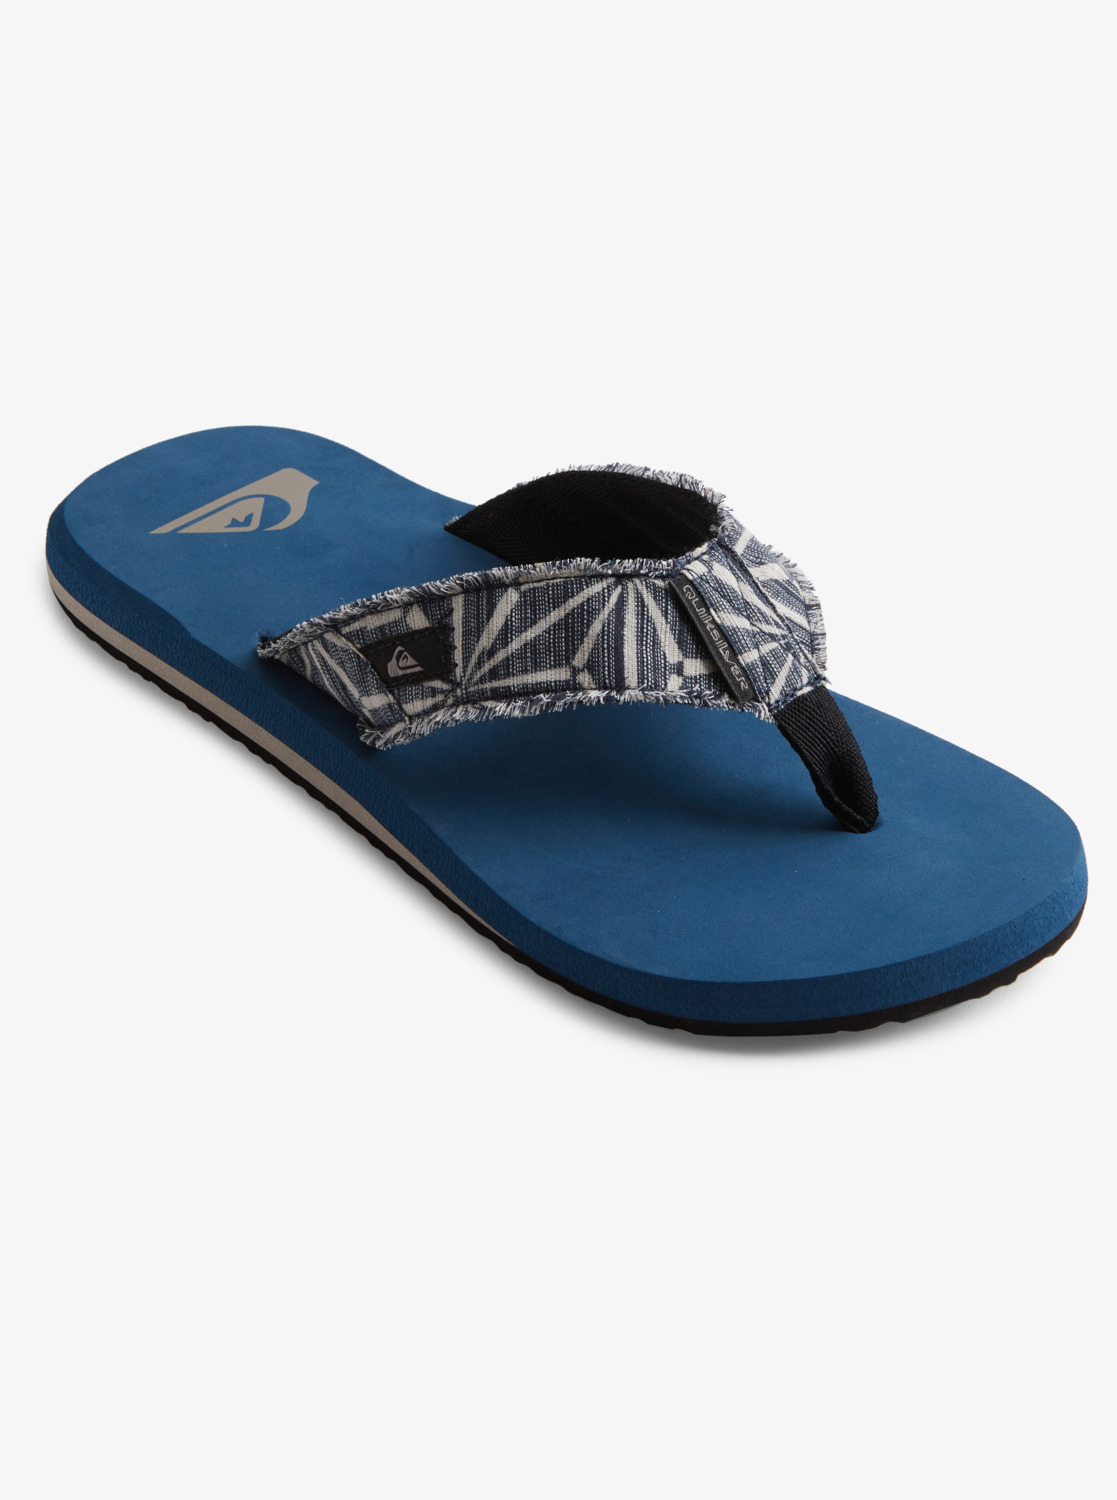 Quiksilver pantofle Monkey Abyss blue Velikost: 45